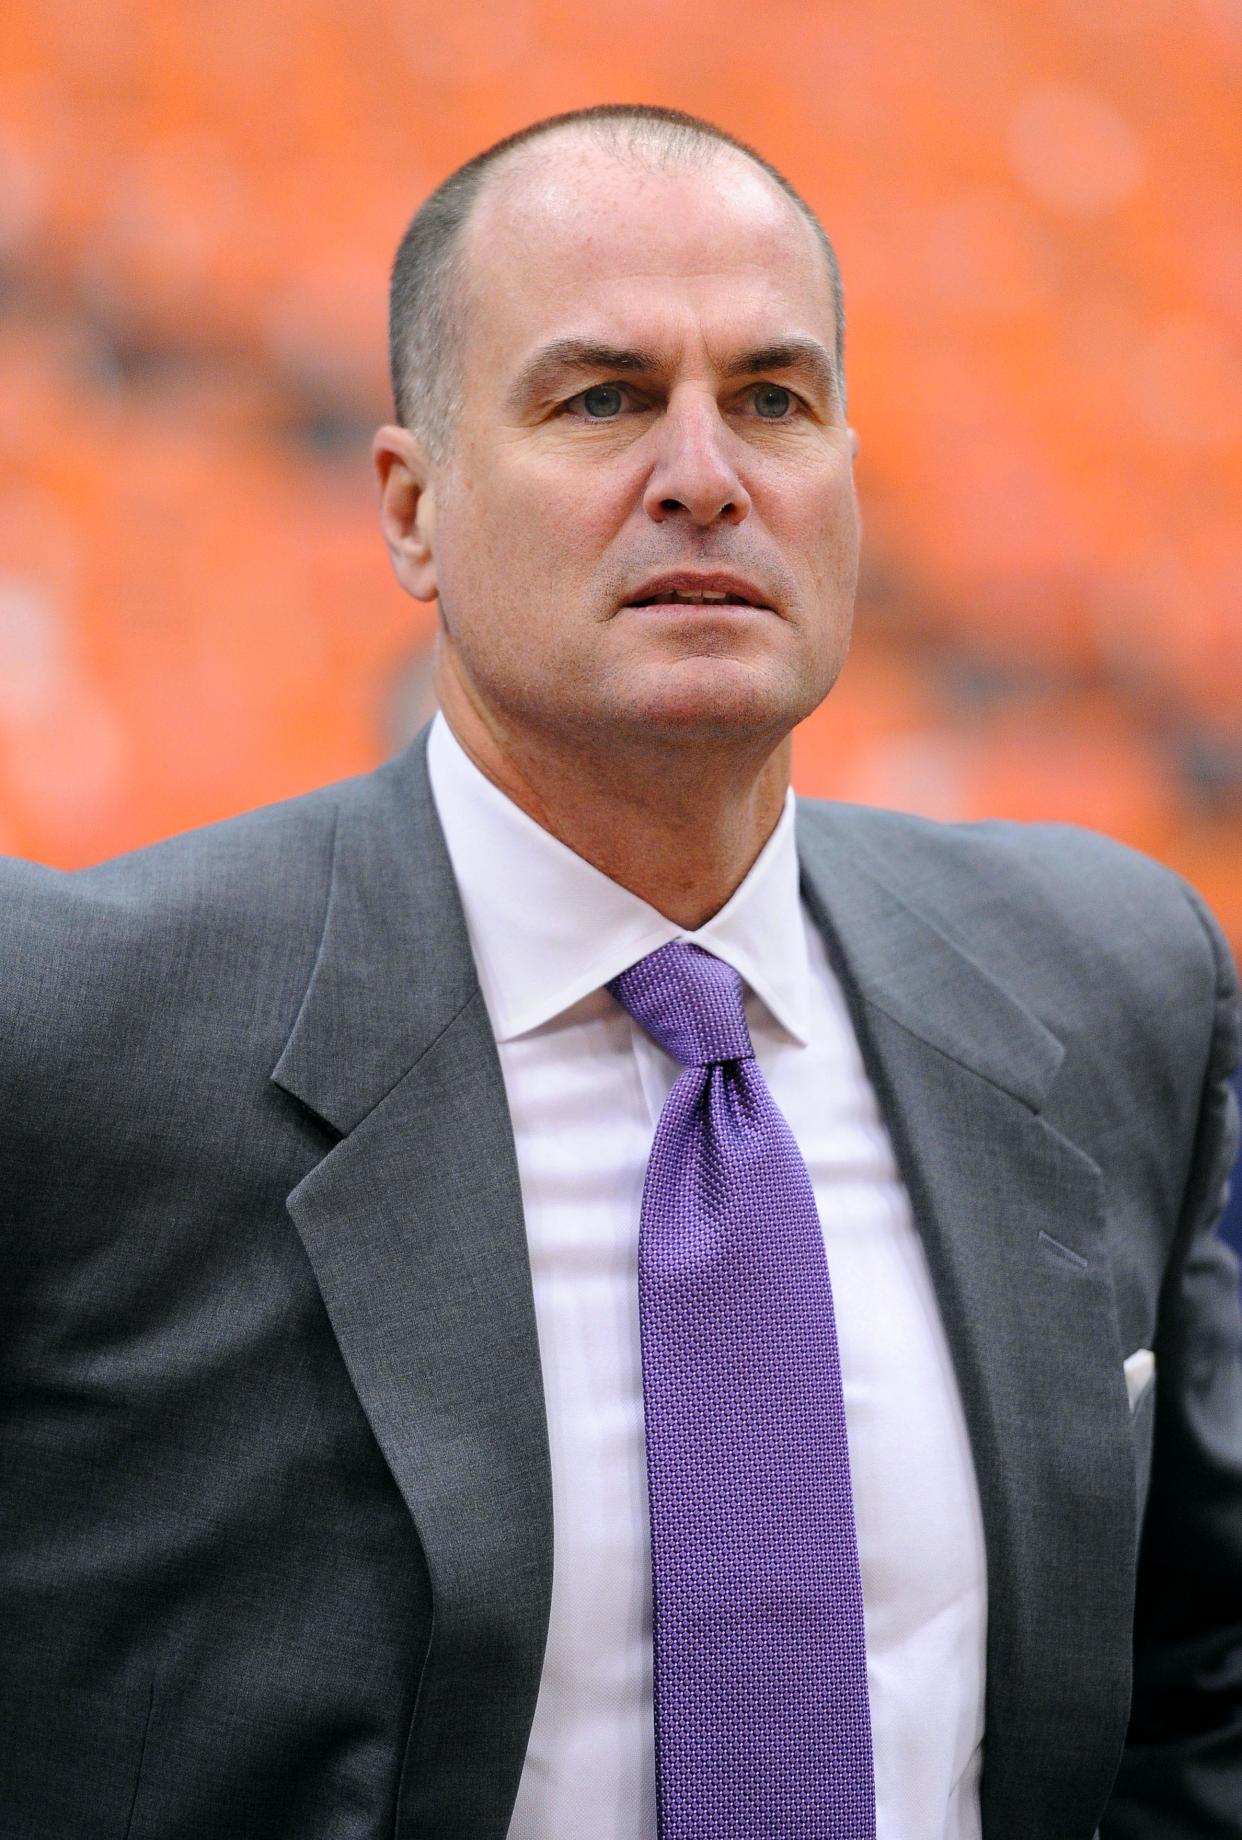 ESPN college basketball broadcaster Jay Bilas joins this week's On Second Thought podcast to discuss his pick of Texas to make the Final Four. Texags.com columnist Olin Buchanan also breaks down the potential second-round showdown between Texas and Texas A&M in Des Moines.